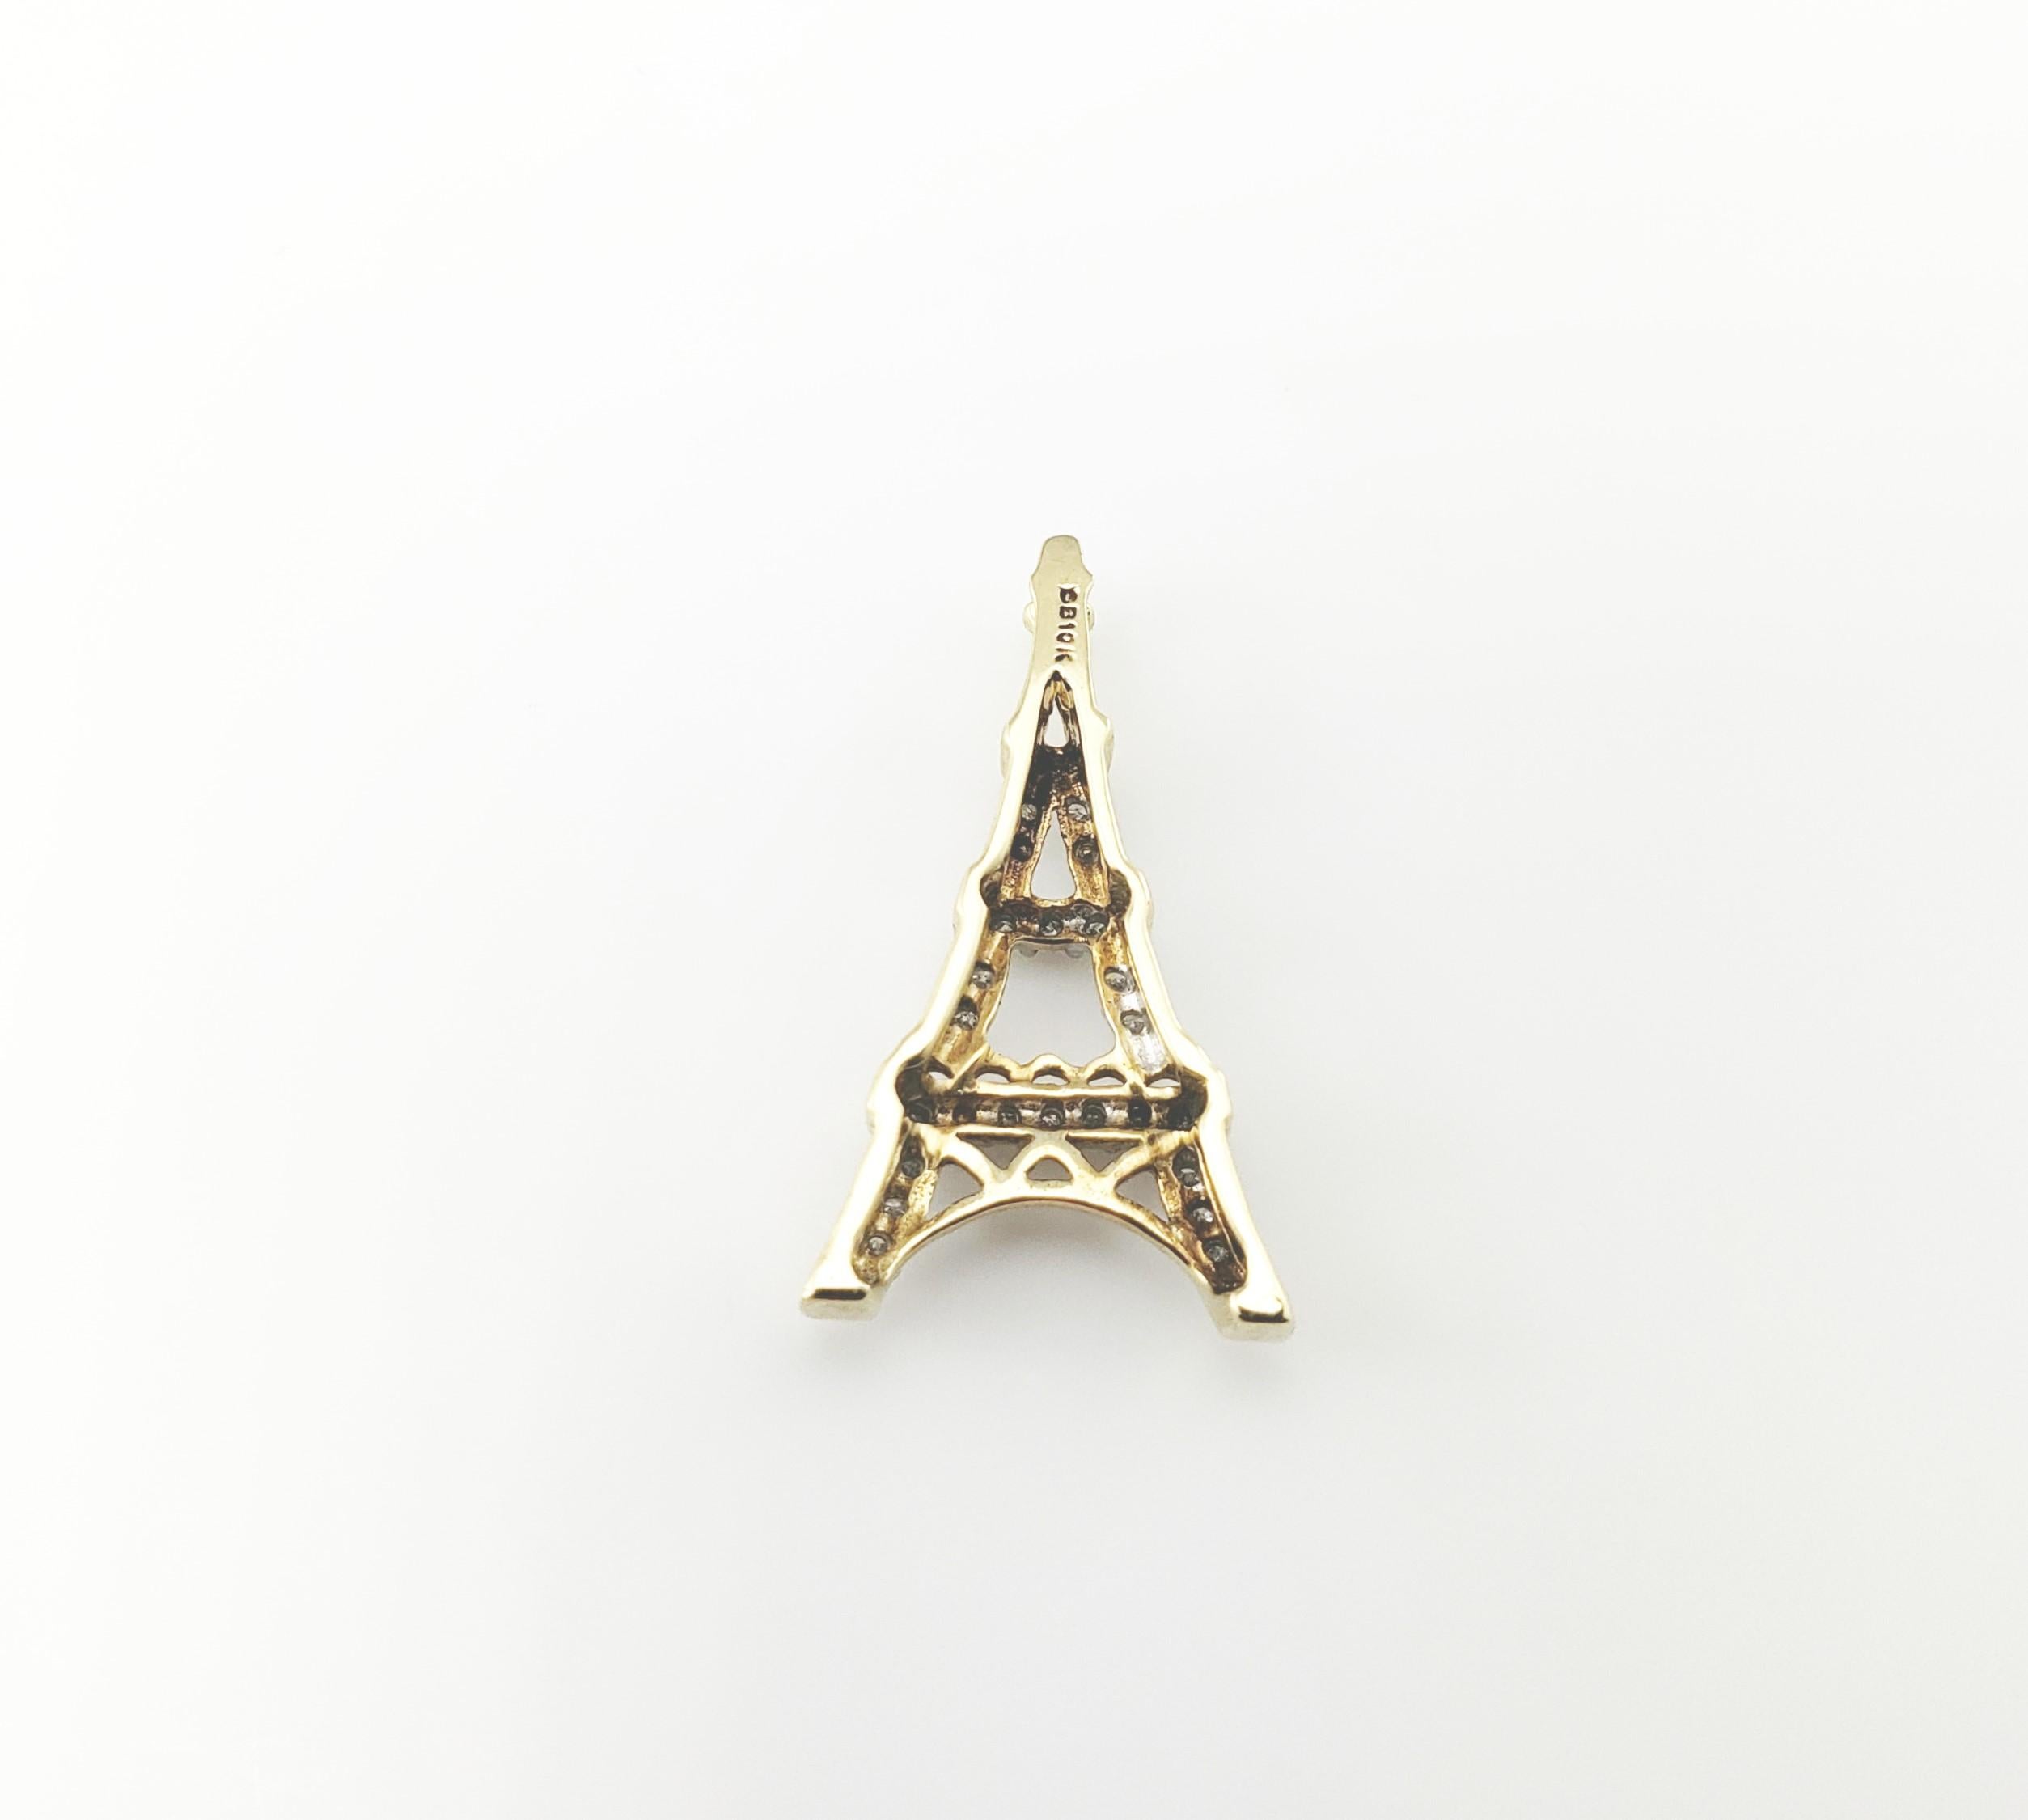 Vintage 10 Karat Yellow Gold and Diamond Eiffel Tower Charm-

The ultimate symbol of France!

This lovely charm features the iconic Eiffel Tower accented with 20 round single cut diamonds set in beautifully detailed 10K yellow gold.

Approximate